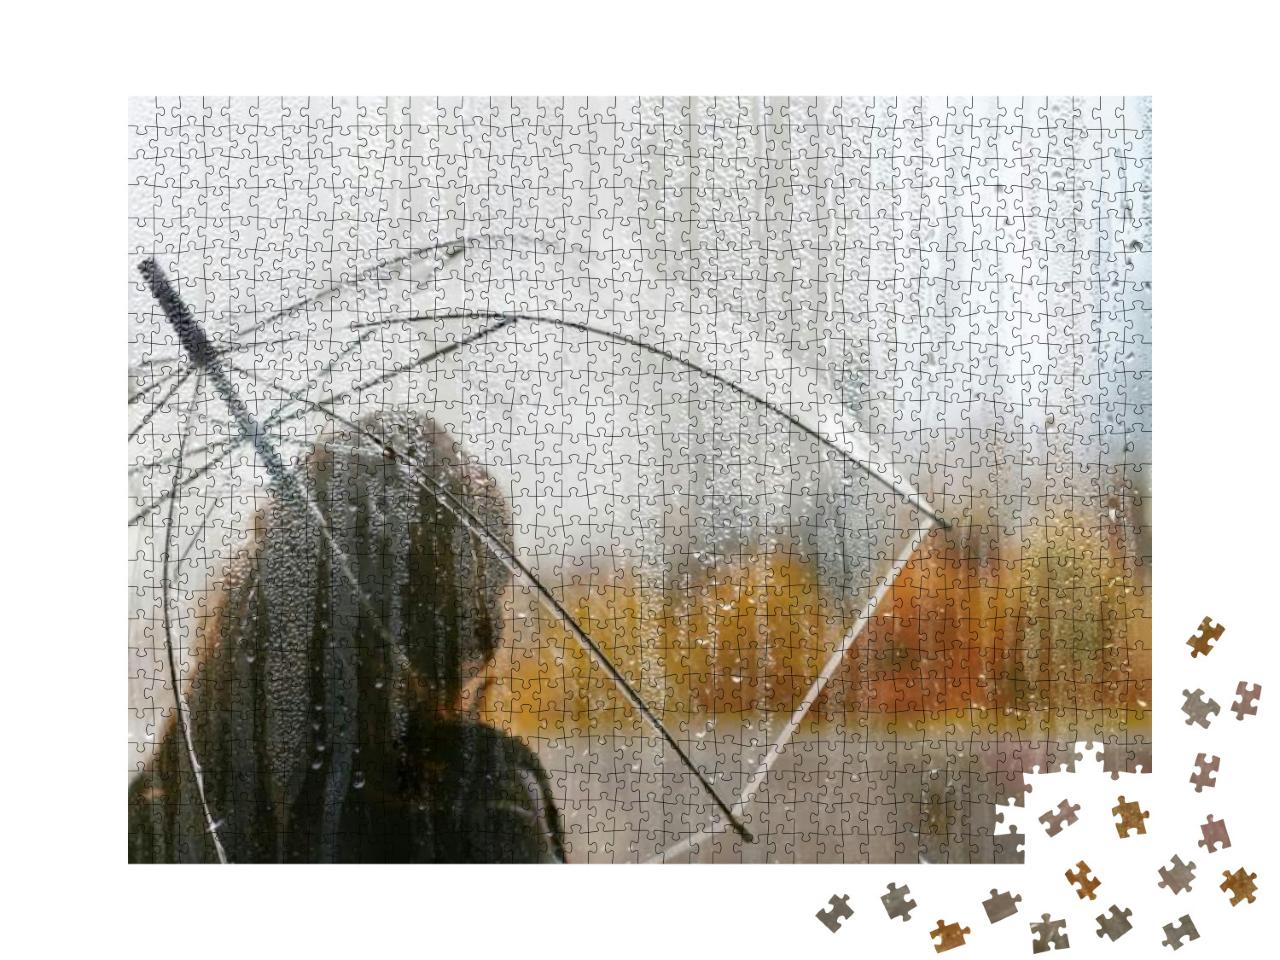 A Woman Silhouette with Transparent Umbrella Through Wet... Jigsaw Puzzle with 1000 pieces